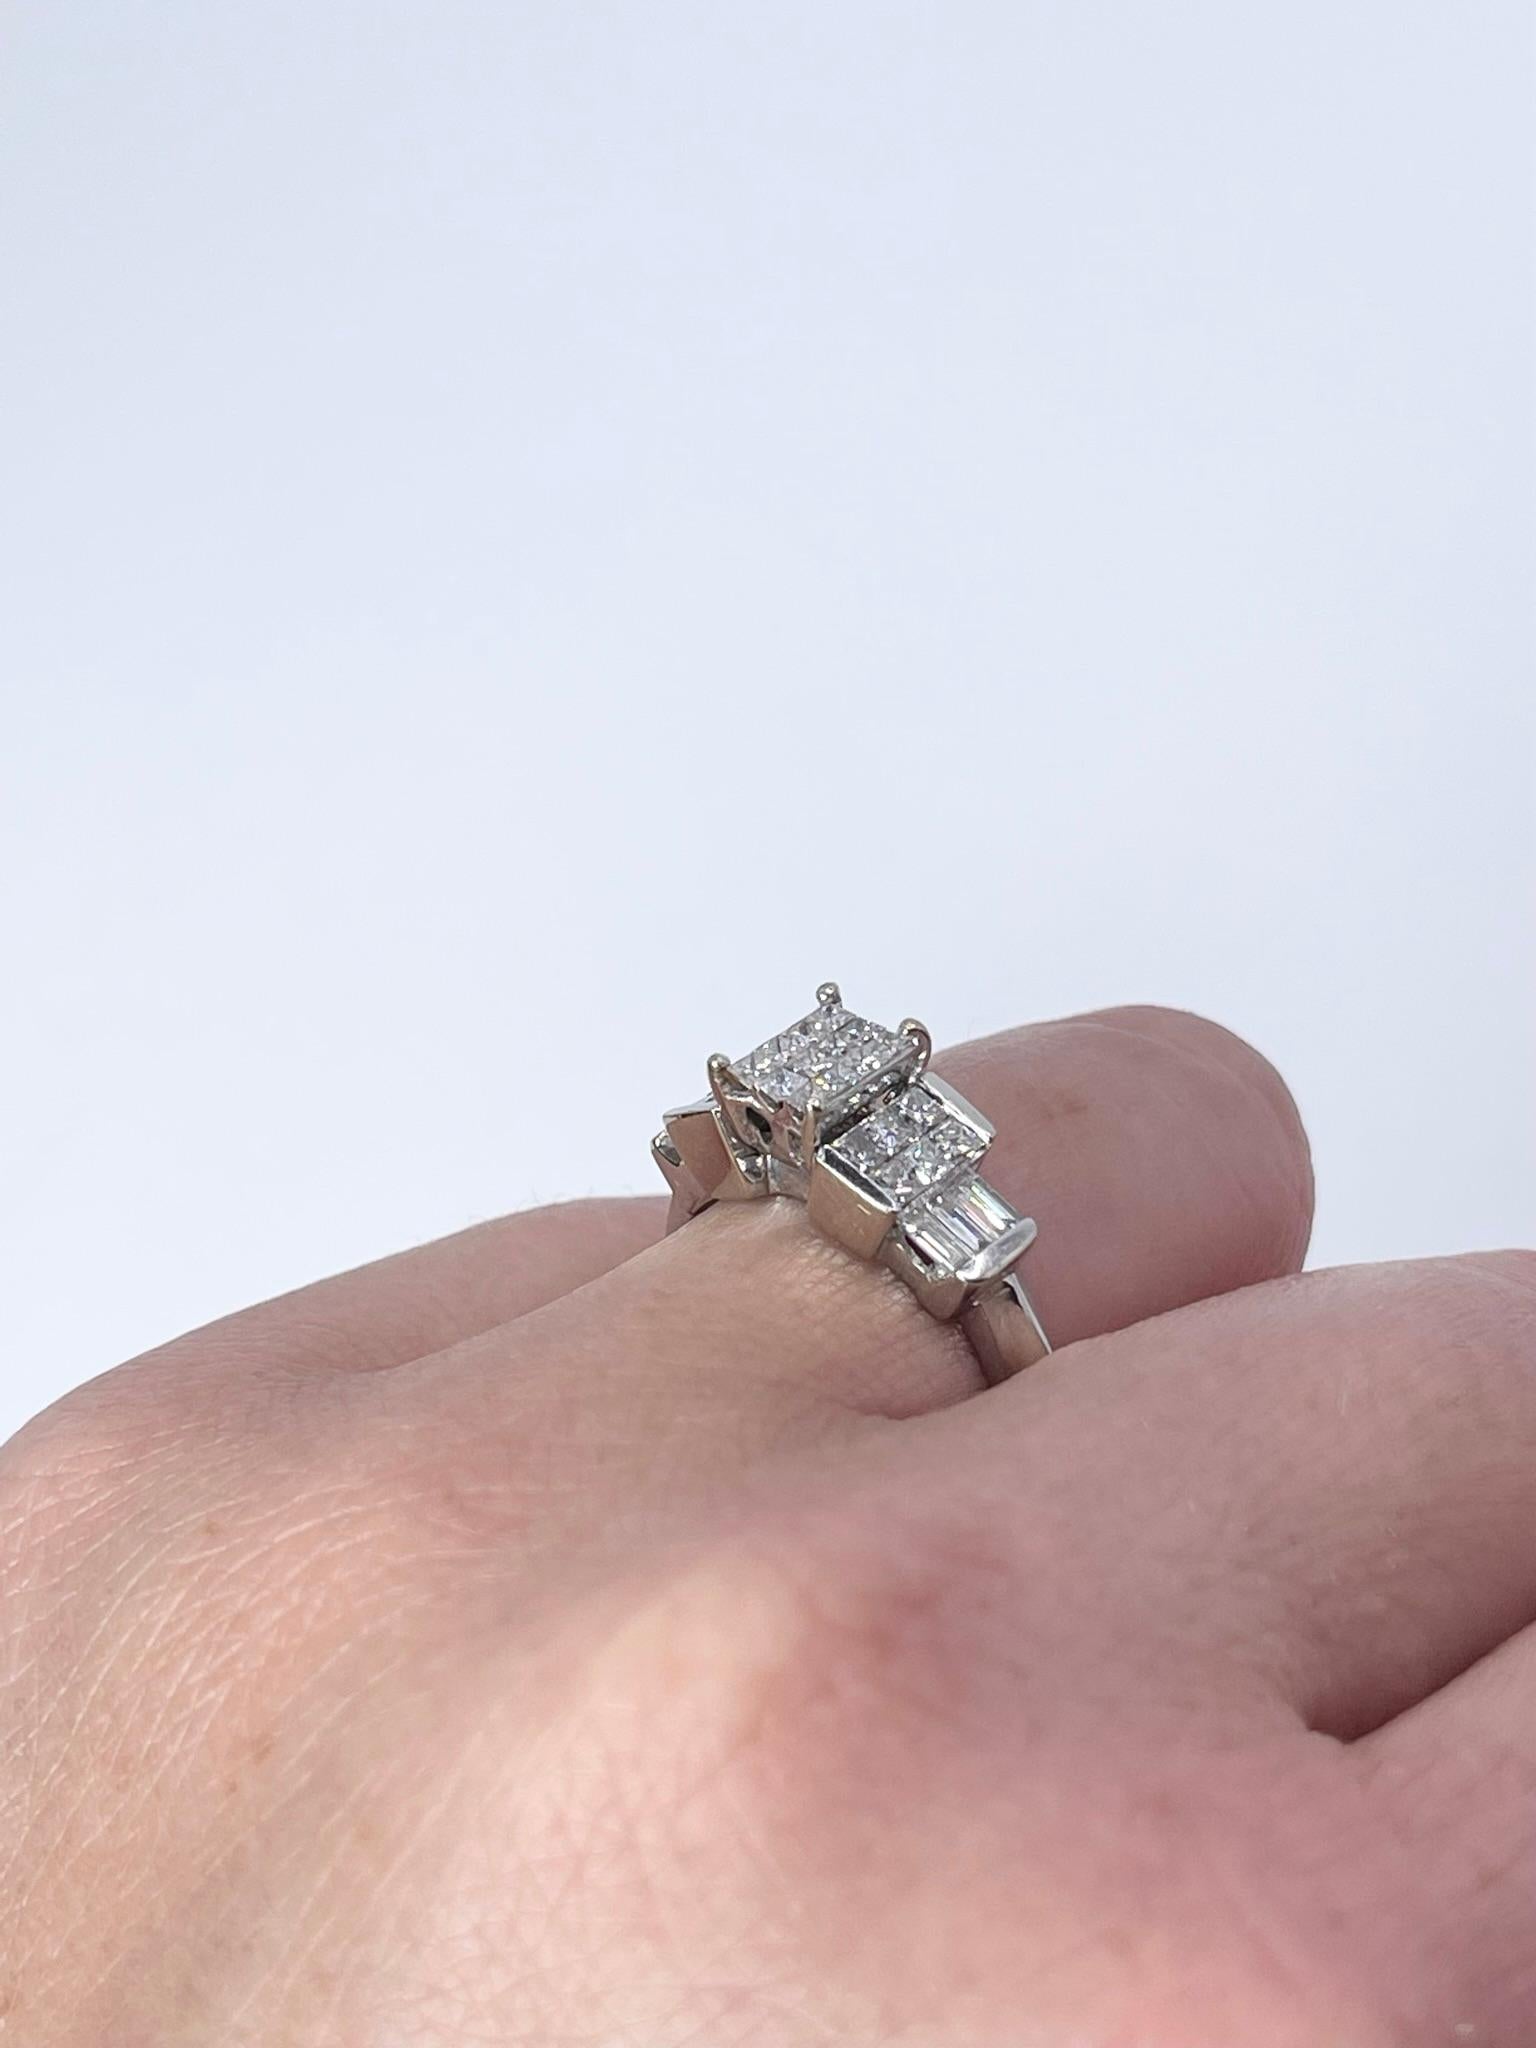 Princess cut diamond ring 14KT white gold Invisible setting diamond ring In New Condition For Sale In Jupiter, FL